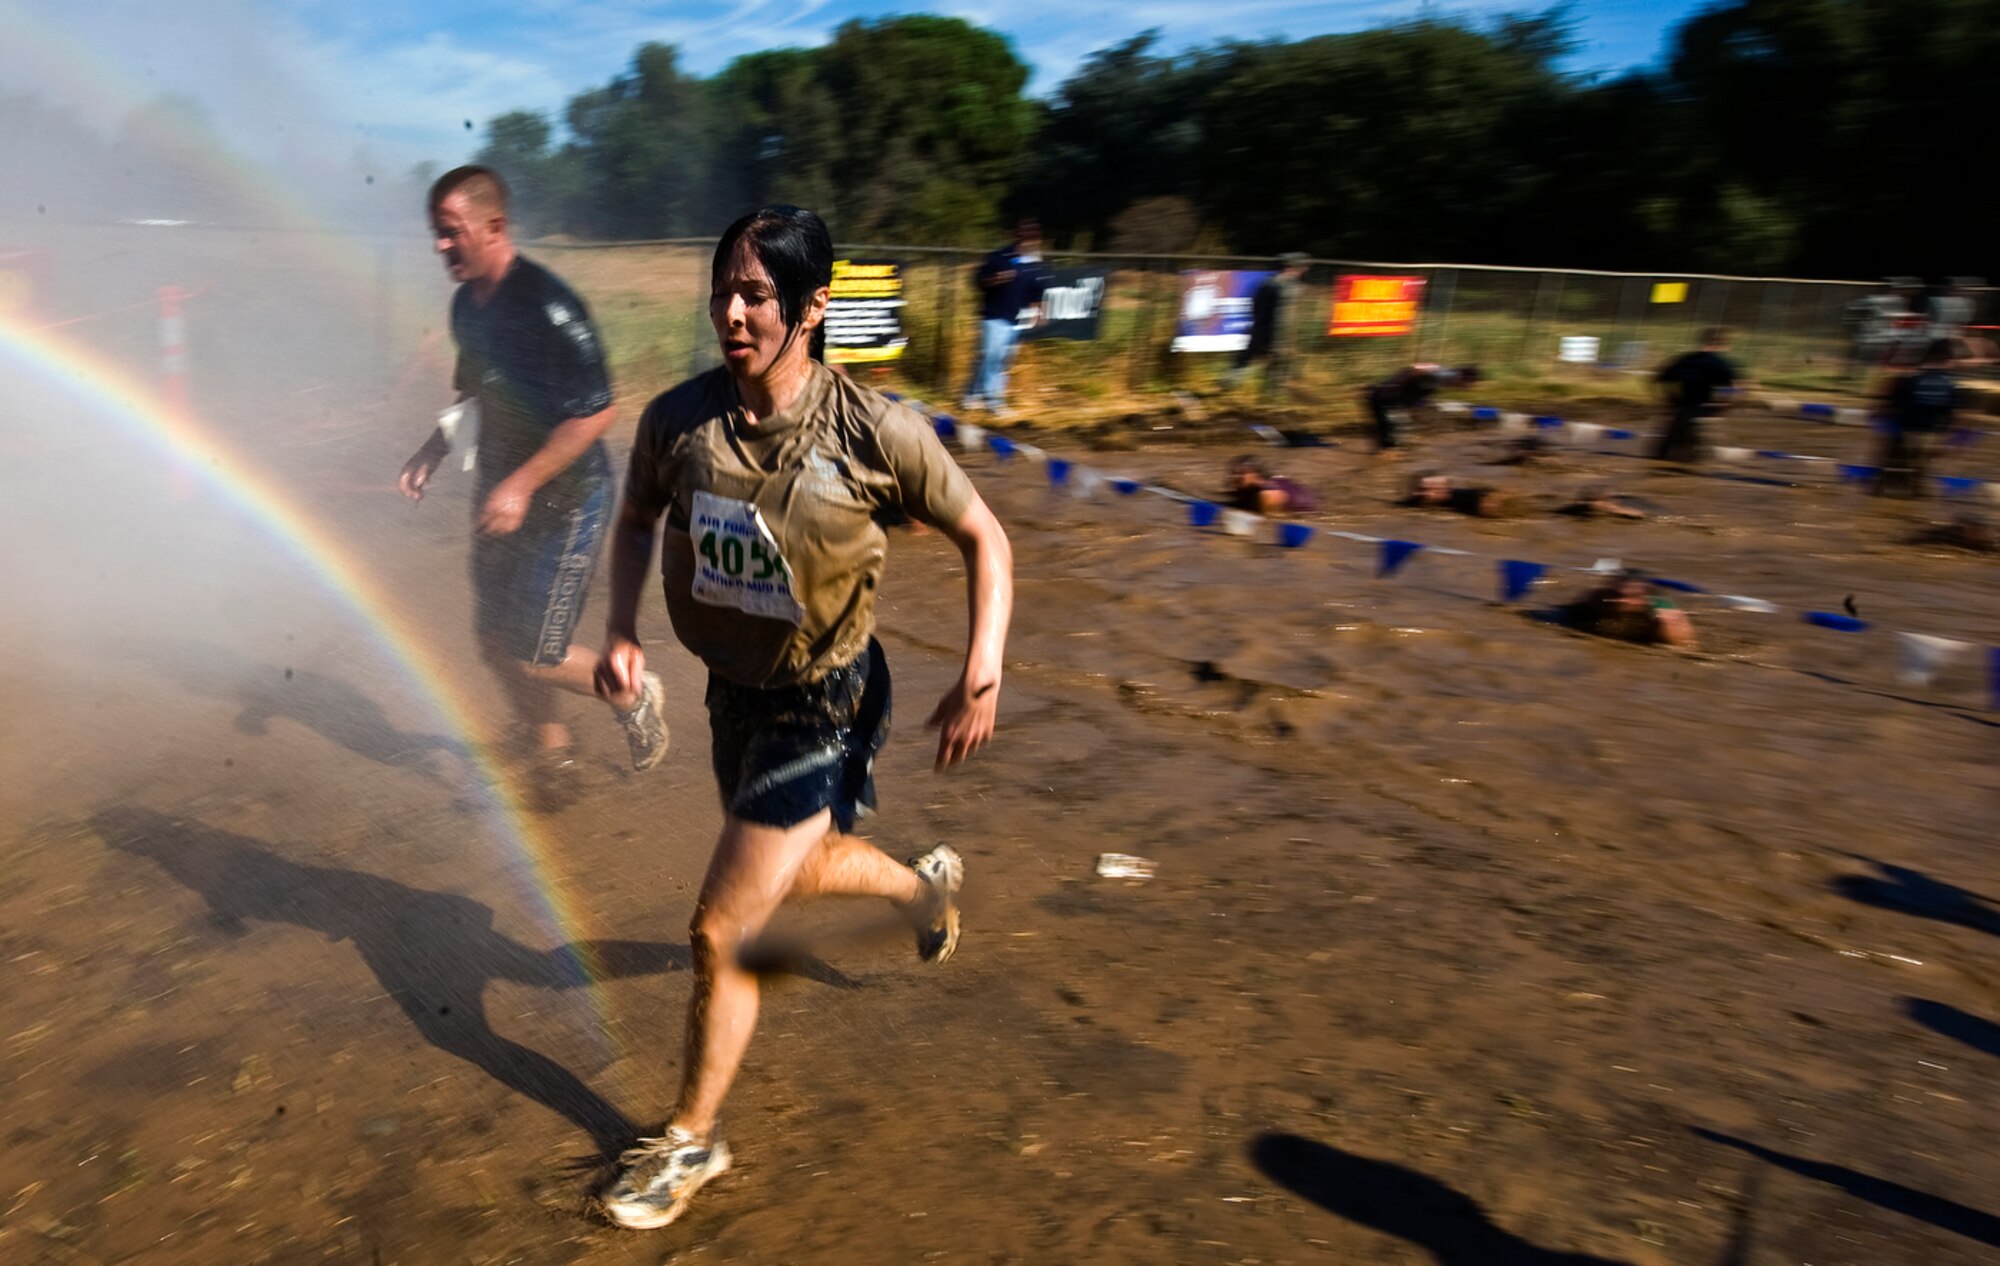 Second Lieutenant Holly Hess races through the mud while being sprayed clean by the Travis Air Force Base Fire Dept. during the 10th Annual Mather Mud Run in Rancho Cordova, Calif., Sept. 5, 2009, for Air Force Week Sacramento. Lieutenant Hess is a public affairs officer with the 60th Air Mobility Wing at Travis AFB, Calif. (U.S. Air Force photo/Staff Sgt. Bennie J. Davis III) 